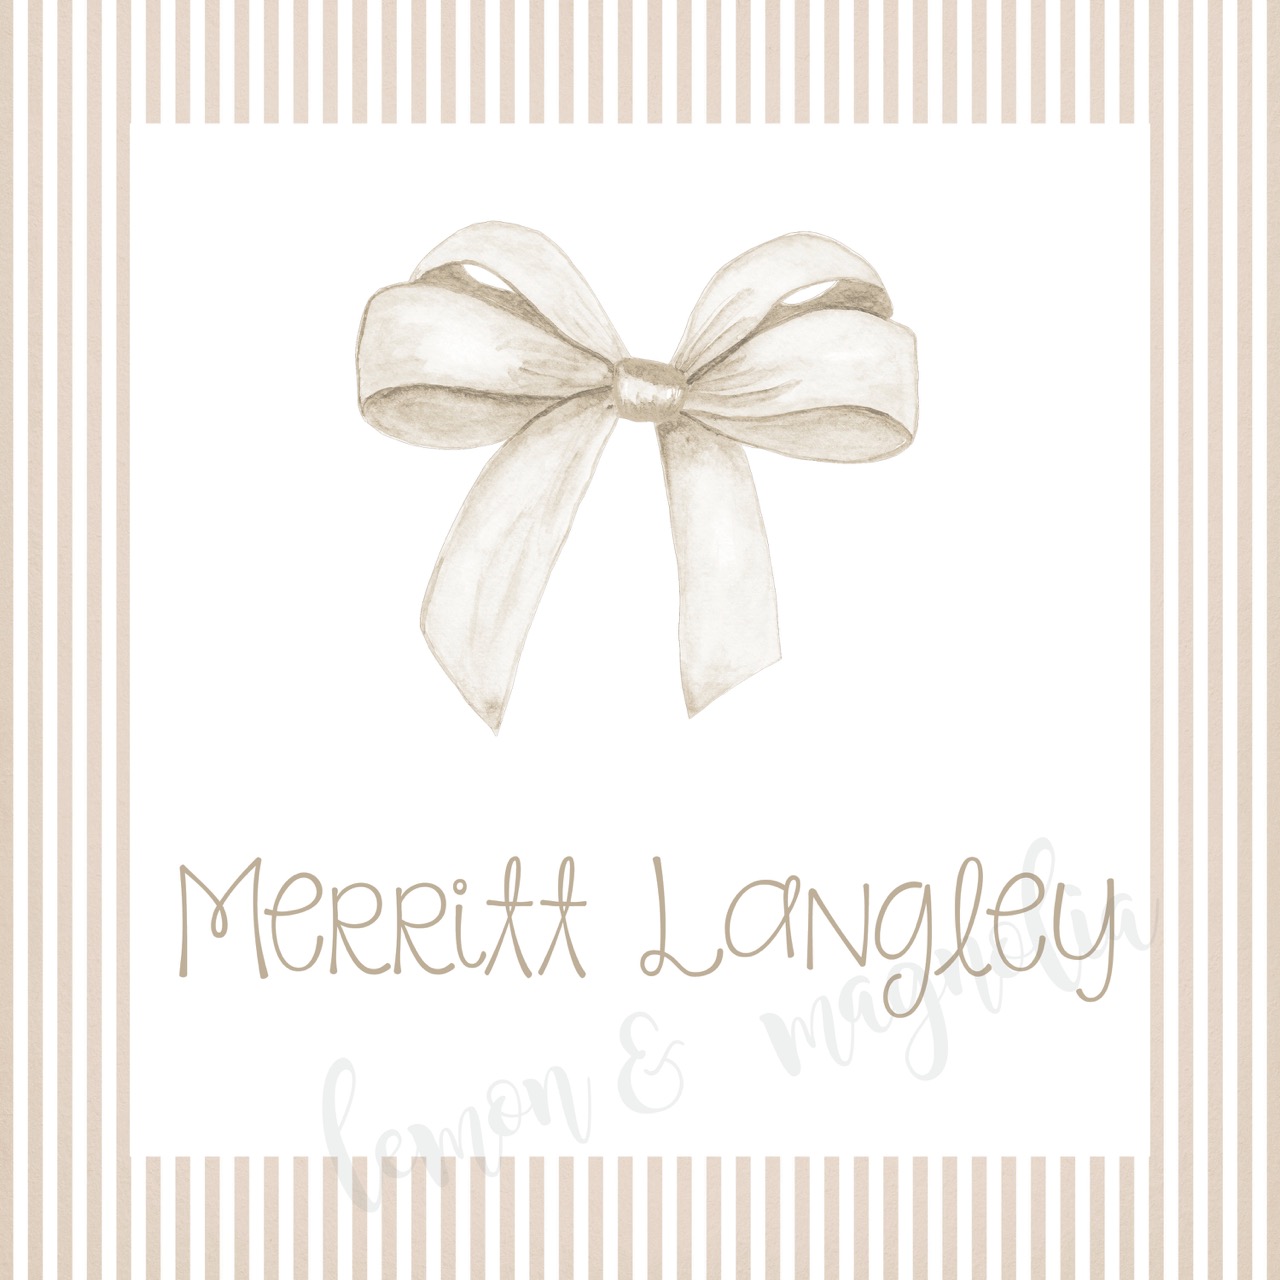 Taupe Seersucker with Bow Personalized Calling Card